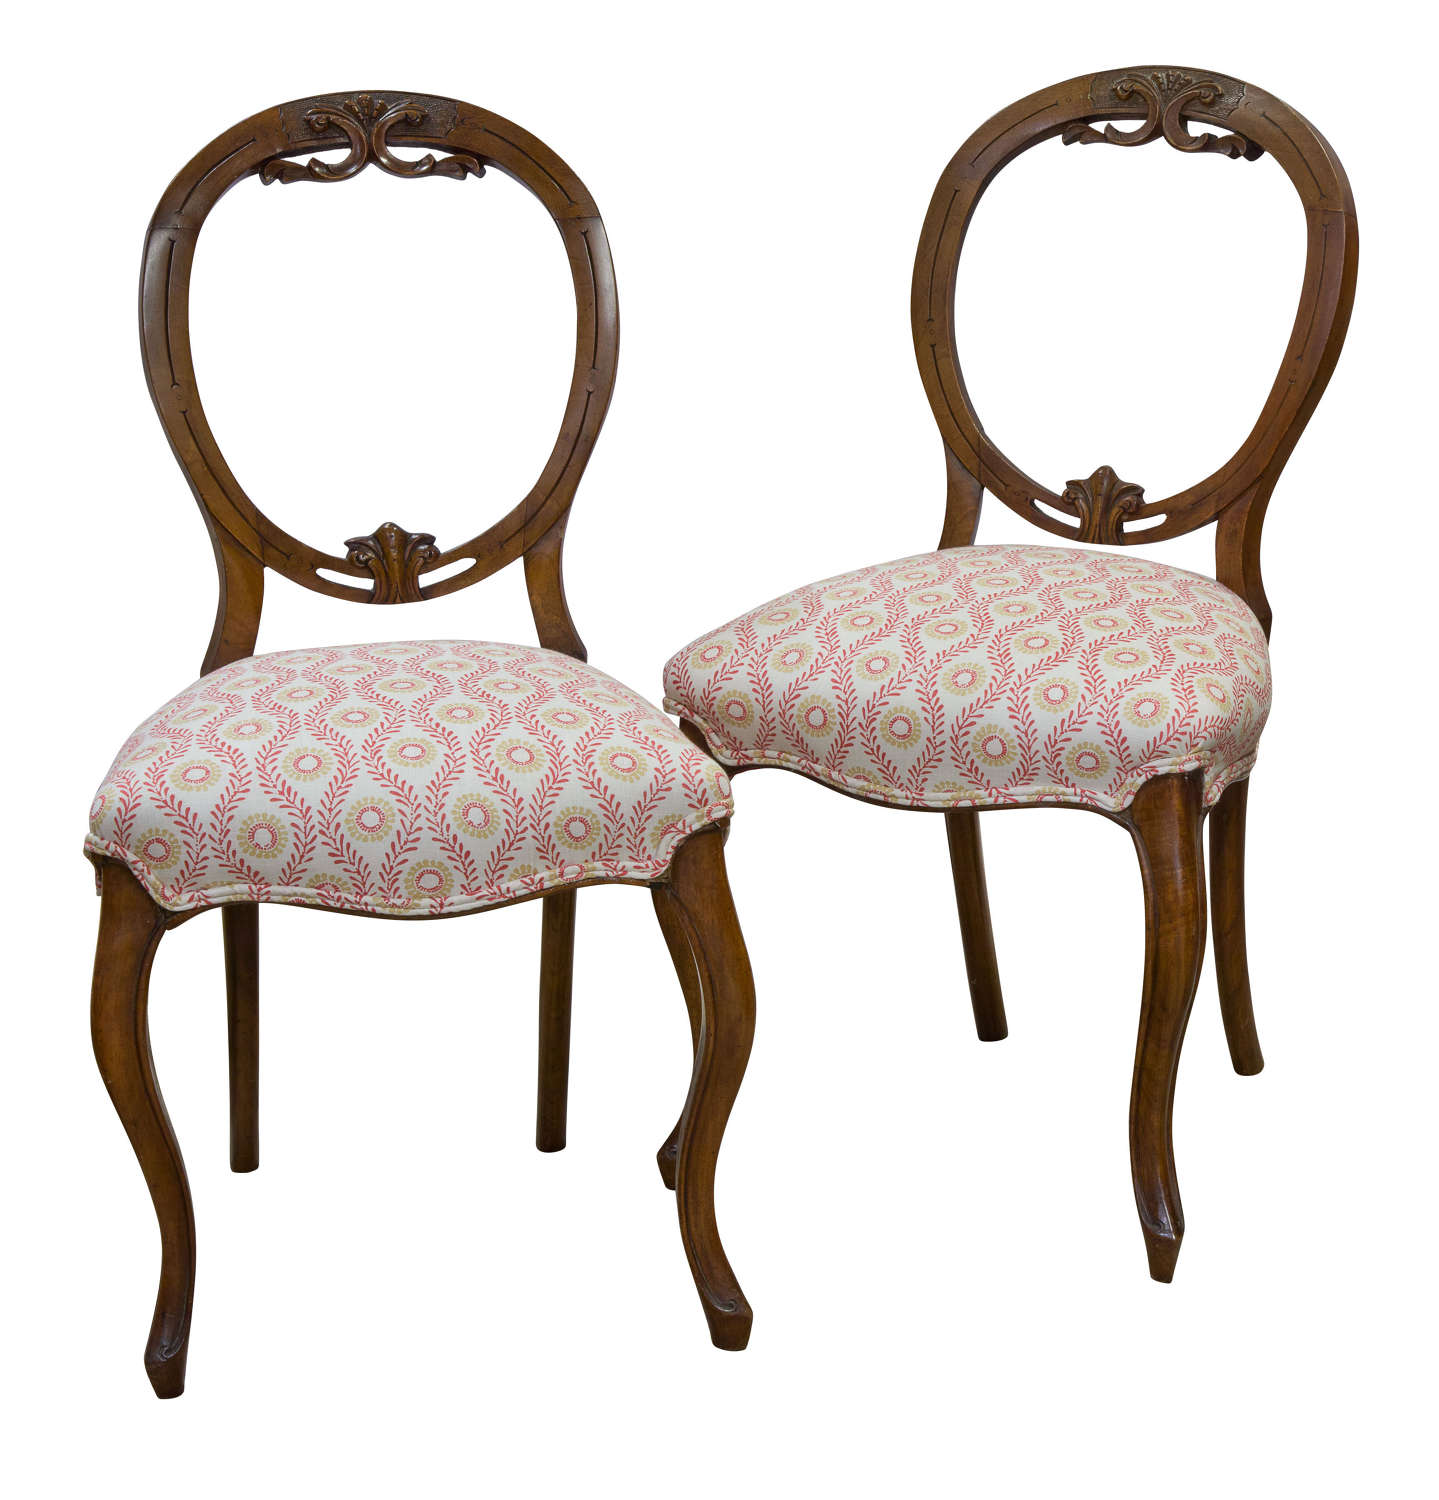 Pair of Victorian walnut balloon back chairs